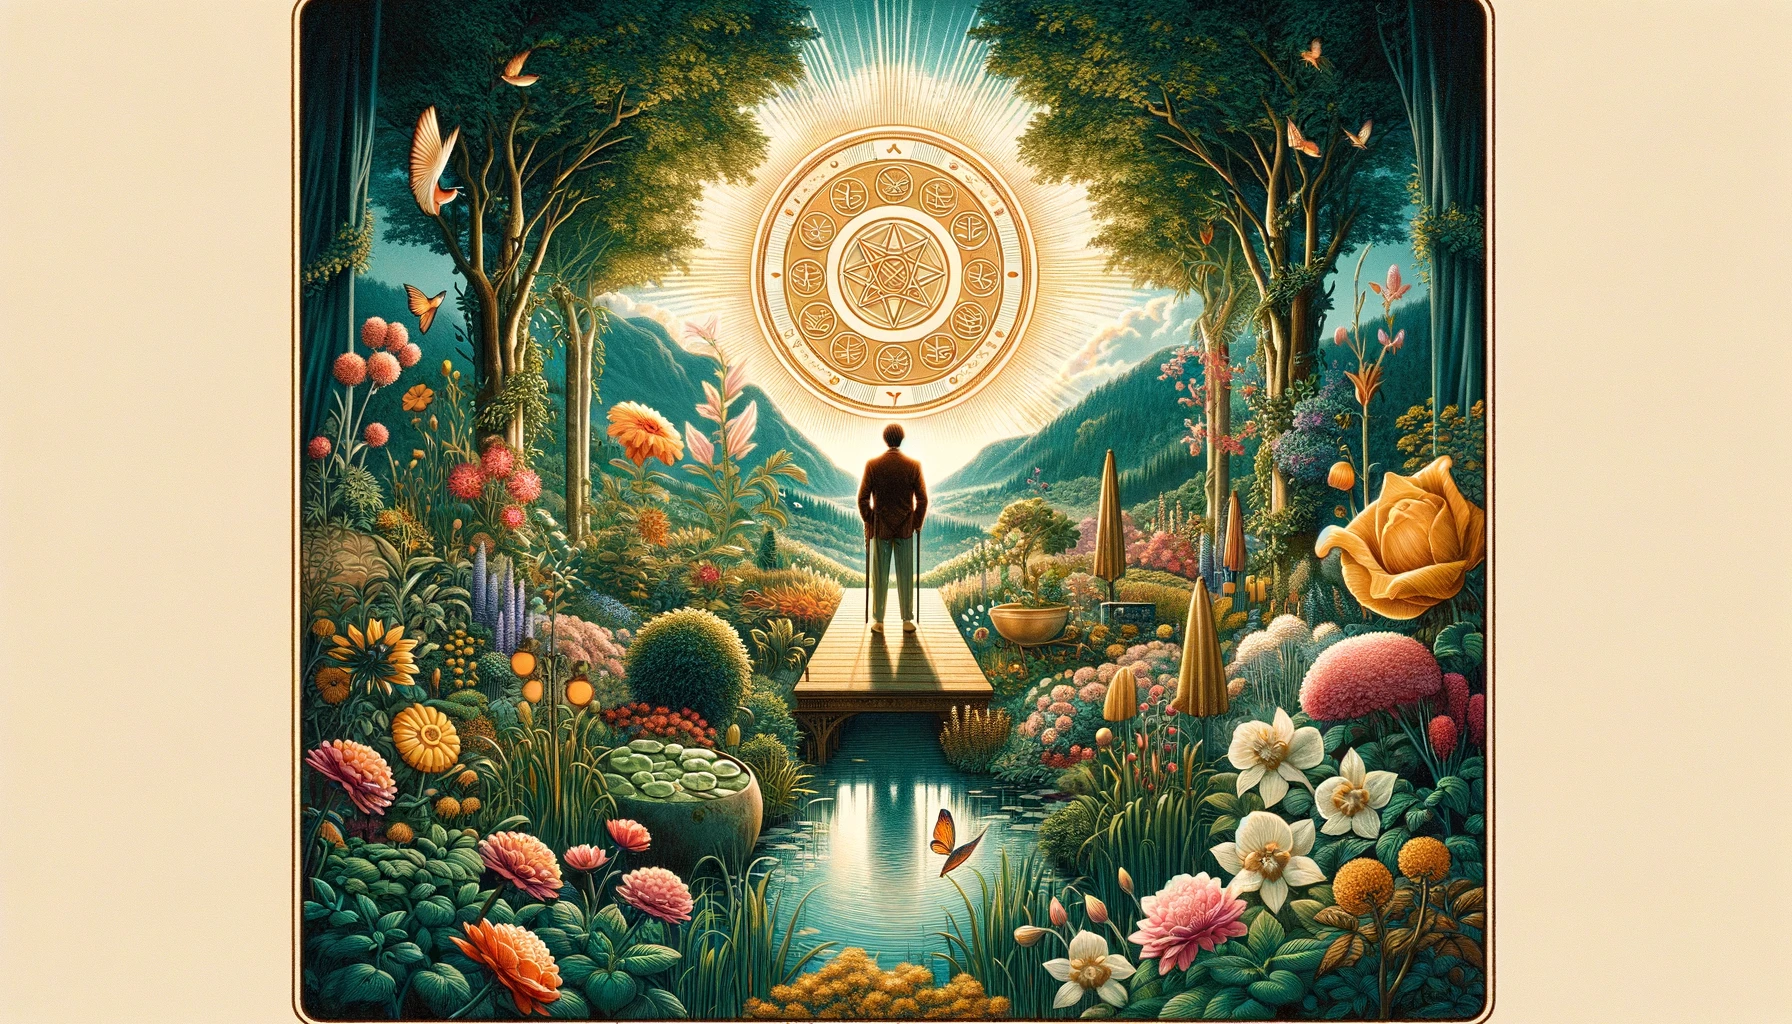 The image depicts a person standing tall and confident in the midst of a vibrant garden, surrounded by lush greenery and blooming flowers. The individual exudes an aura of self-assurance and contentment, symbolizing self-sufficiency, success, and satisfaction with their life's accomplishments. The scene evokes a sense of prosperity and fulfillment, suggesting a positive response to inquiries about personal fulfillment, independence, and the realization of one's aspirations. This visualization embodies themes of growth, abundance, and the rewarding outcomes that stem from dedication and perseverance towards one's goals.